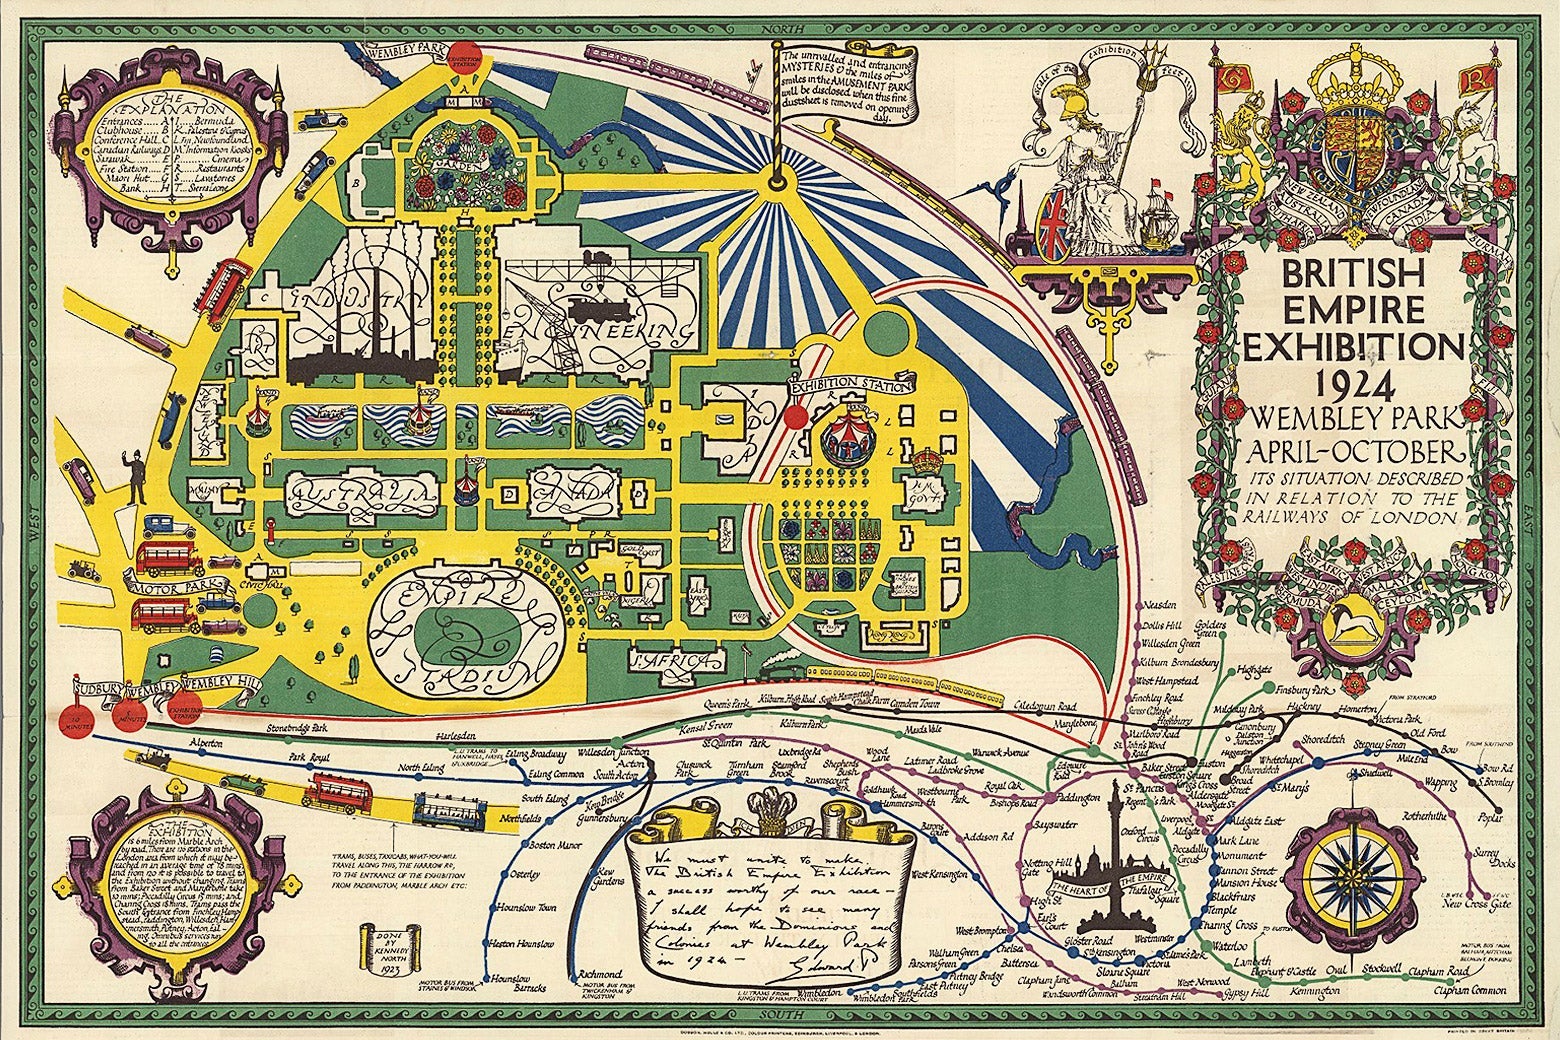 Pictorial map of Wembley featuring gardens, avenues, lakes, exhibition pavilions, and amusement park